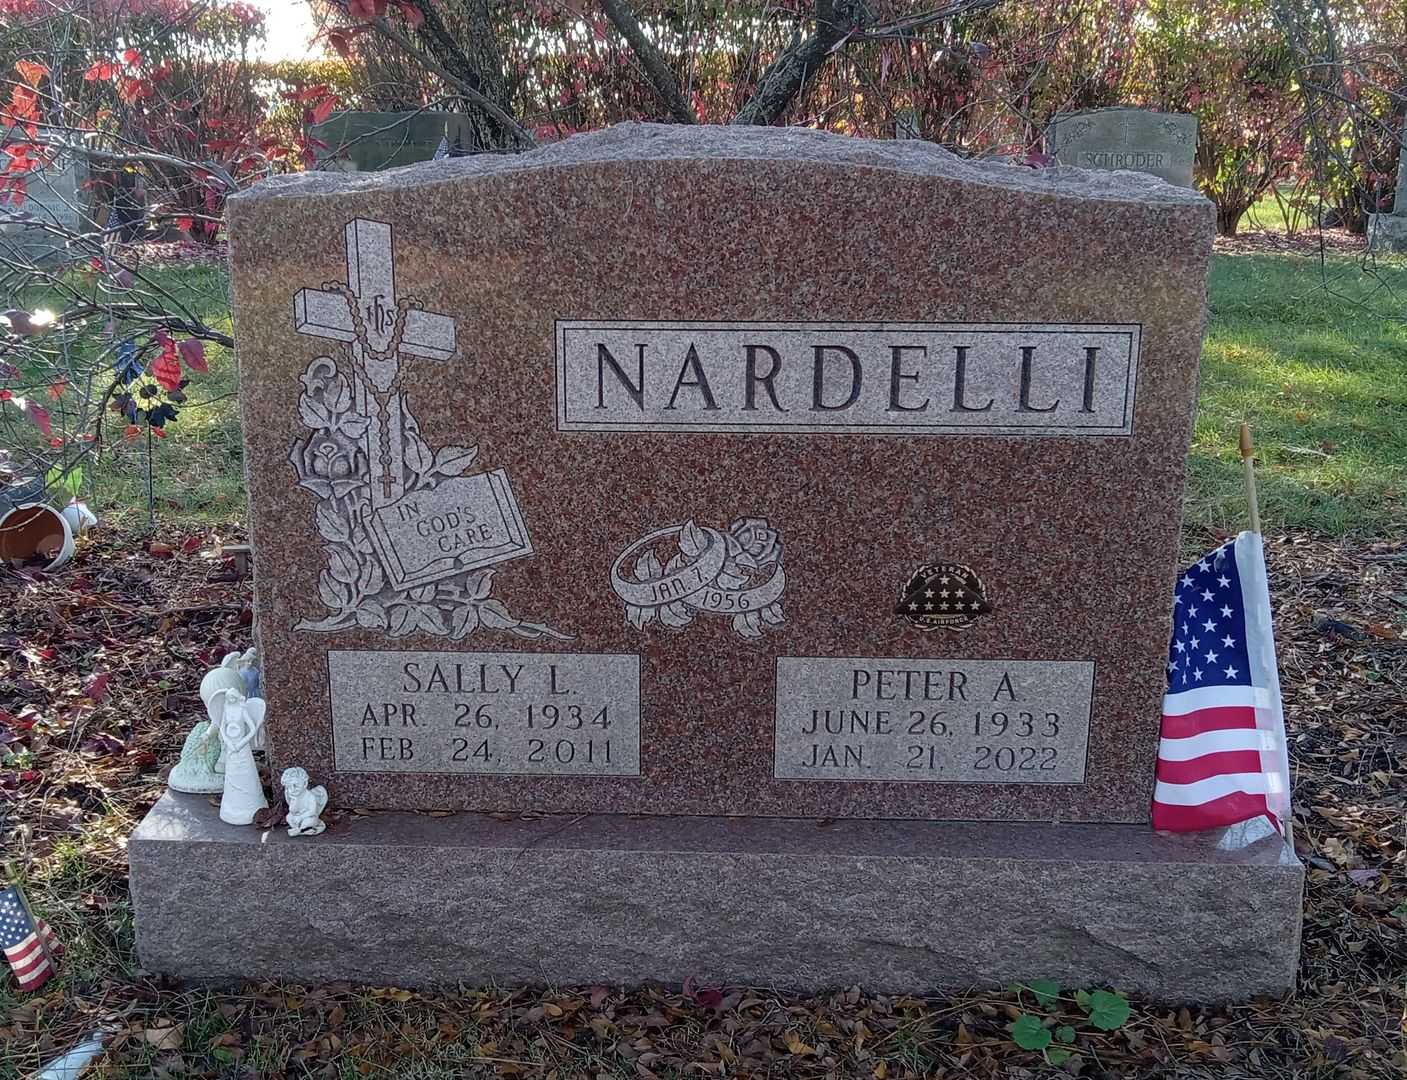 Peter A. Nardelli's grave. Photo 1